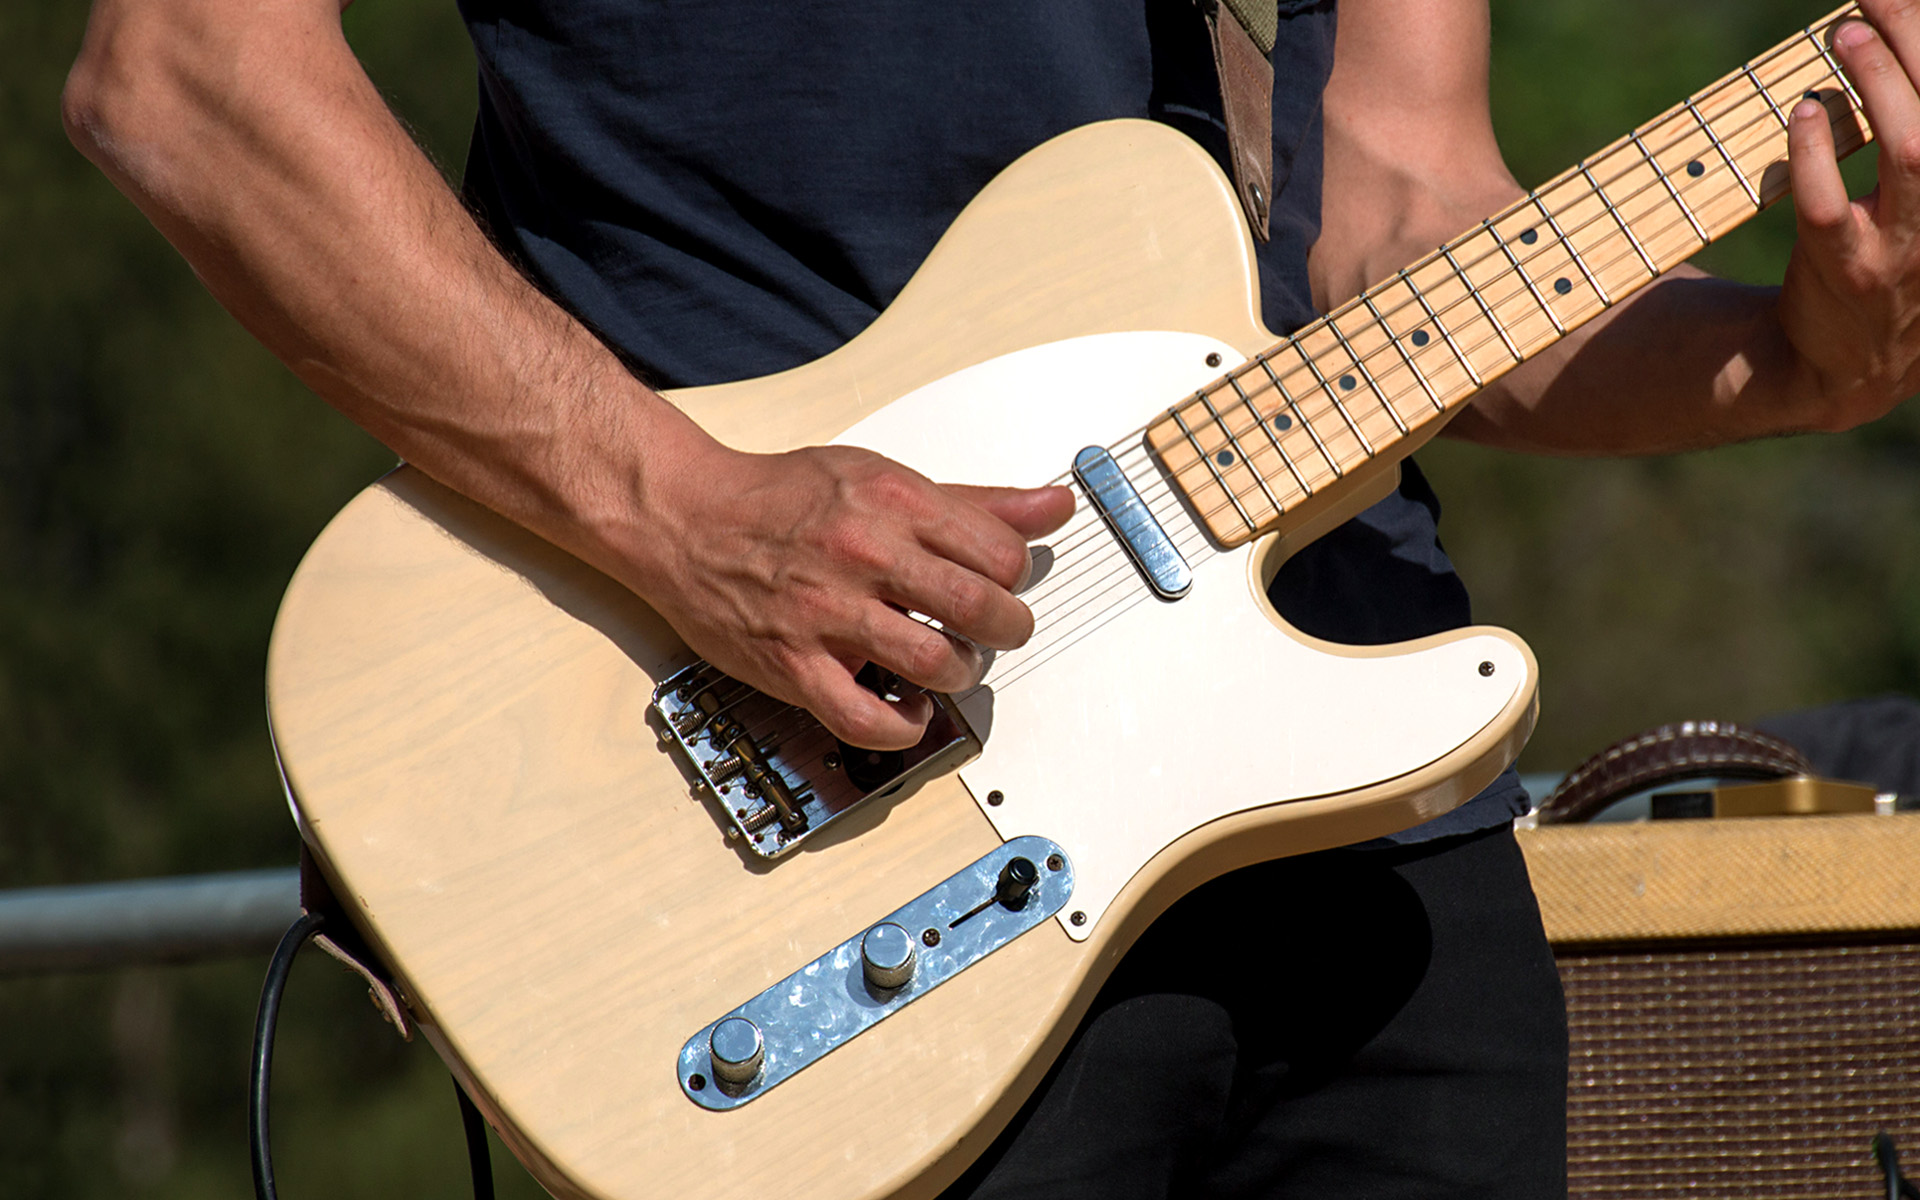 A muscular man plays a Fender Telecaster guitar, presumably delivering some hot country music licks.